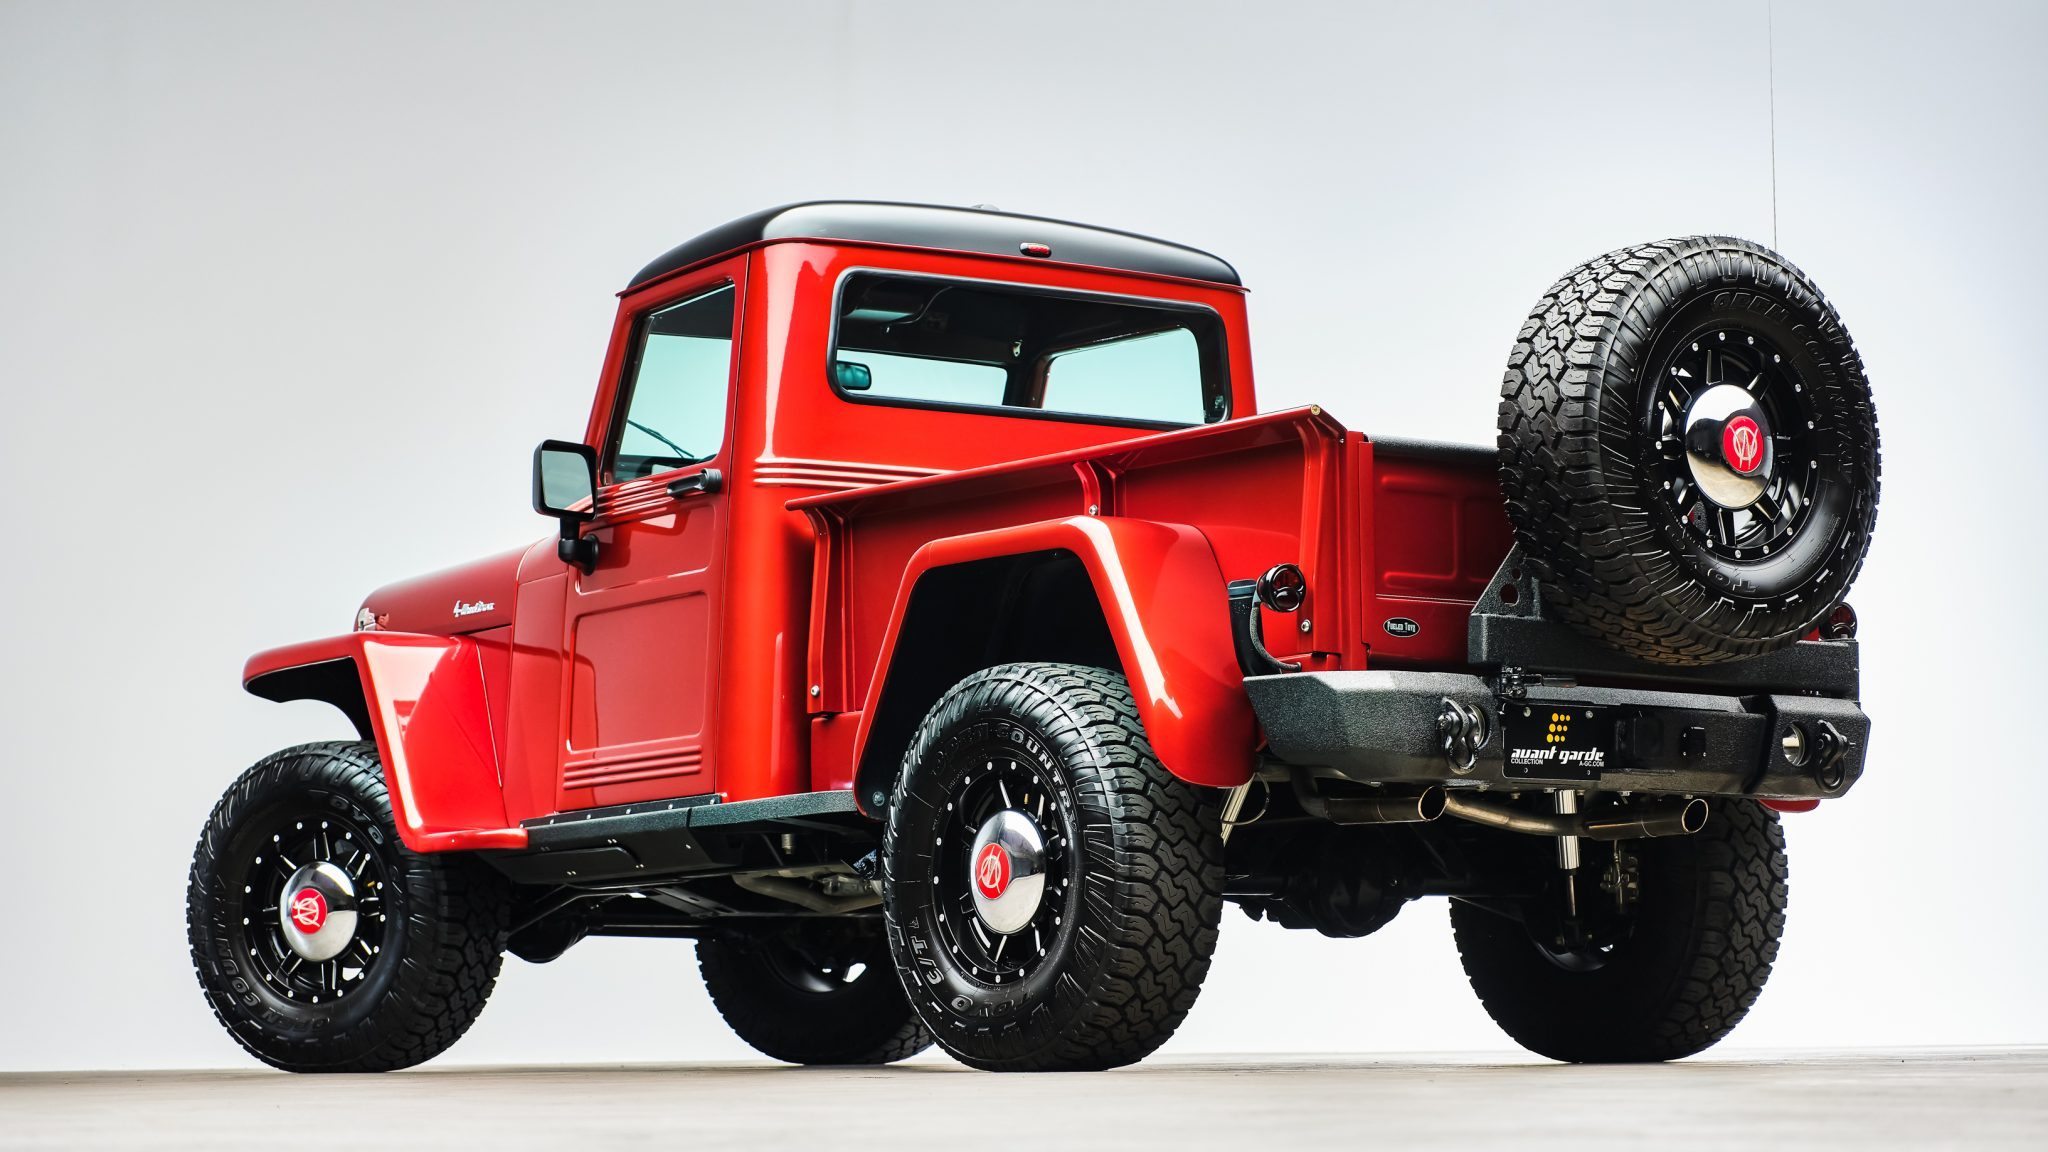 1955 Willys Jeep Pickup With JK Wrangler Chassis Rocks